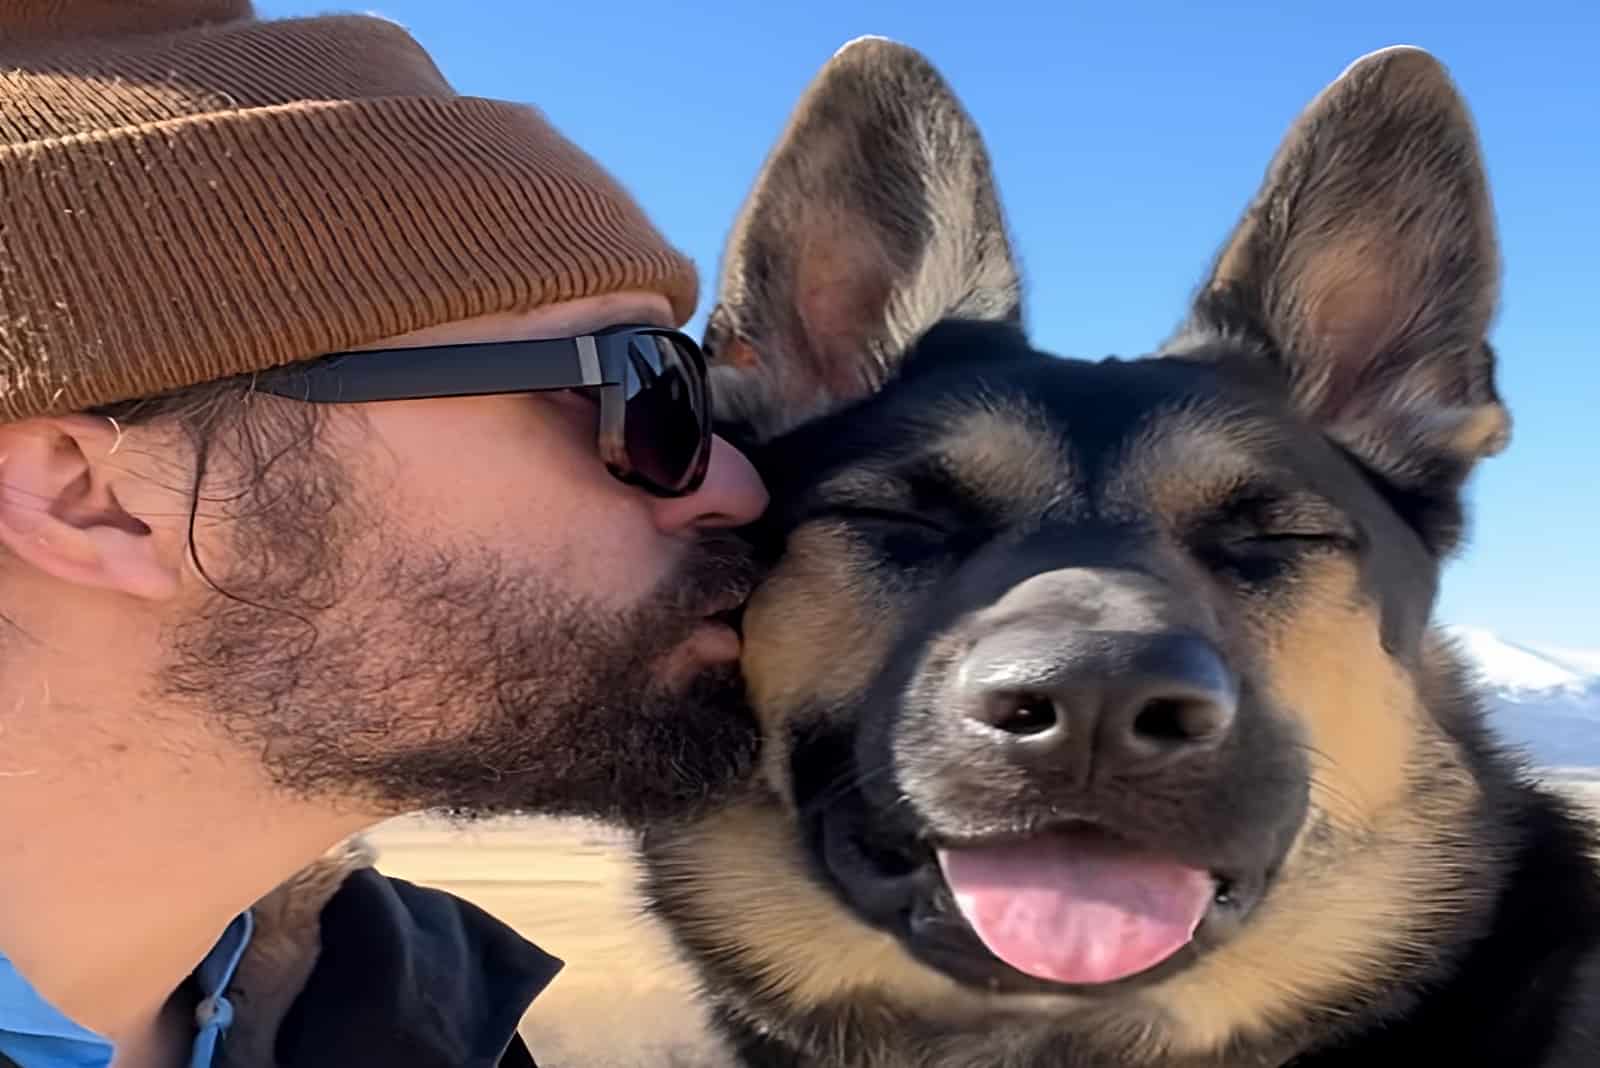 Man Found A GSD Pup That Fixed His Broken Heart